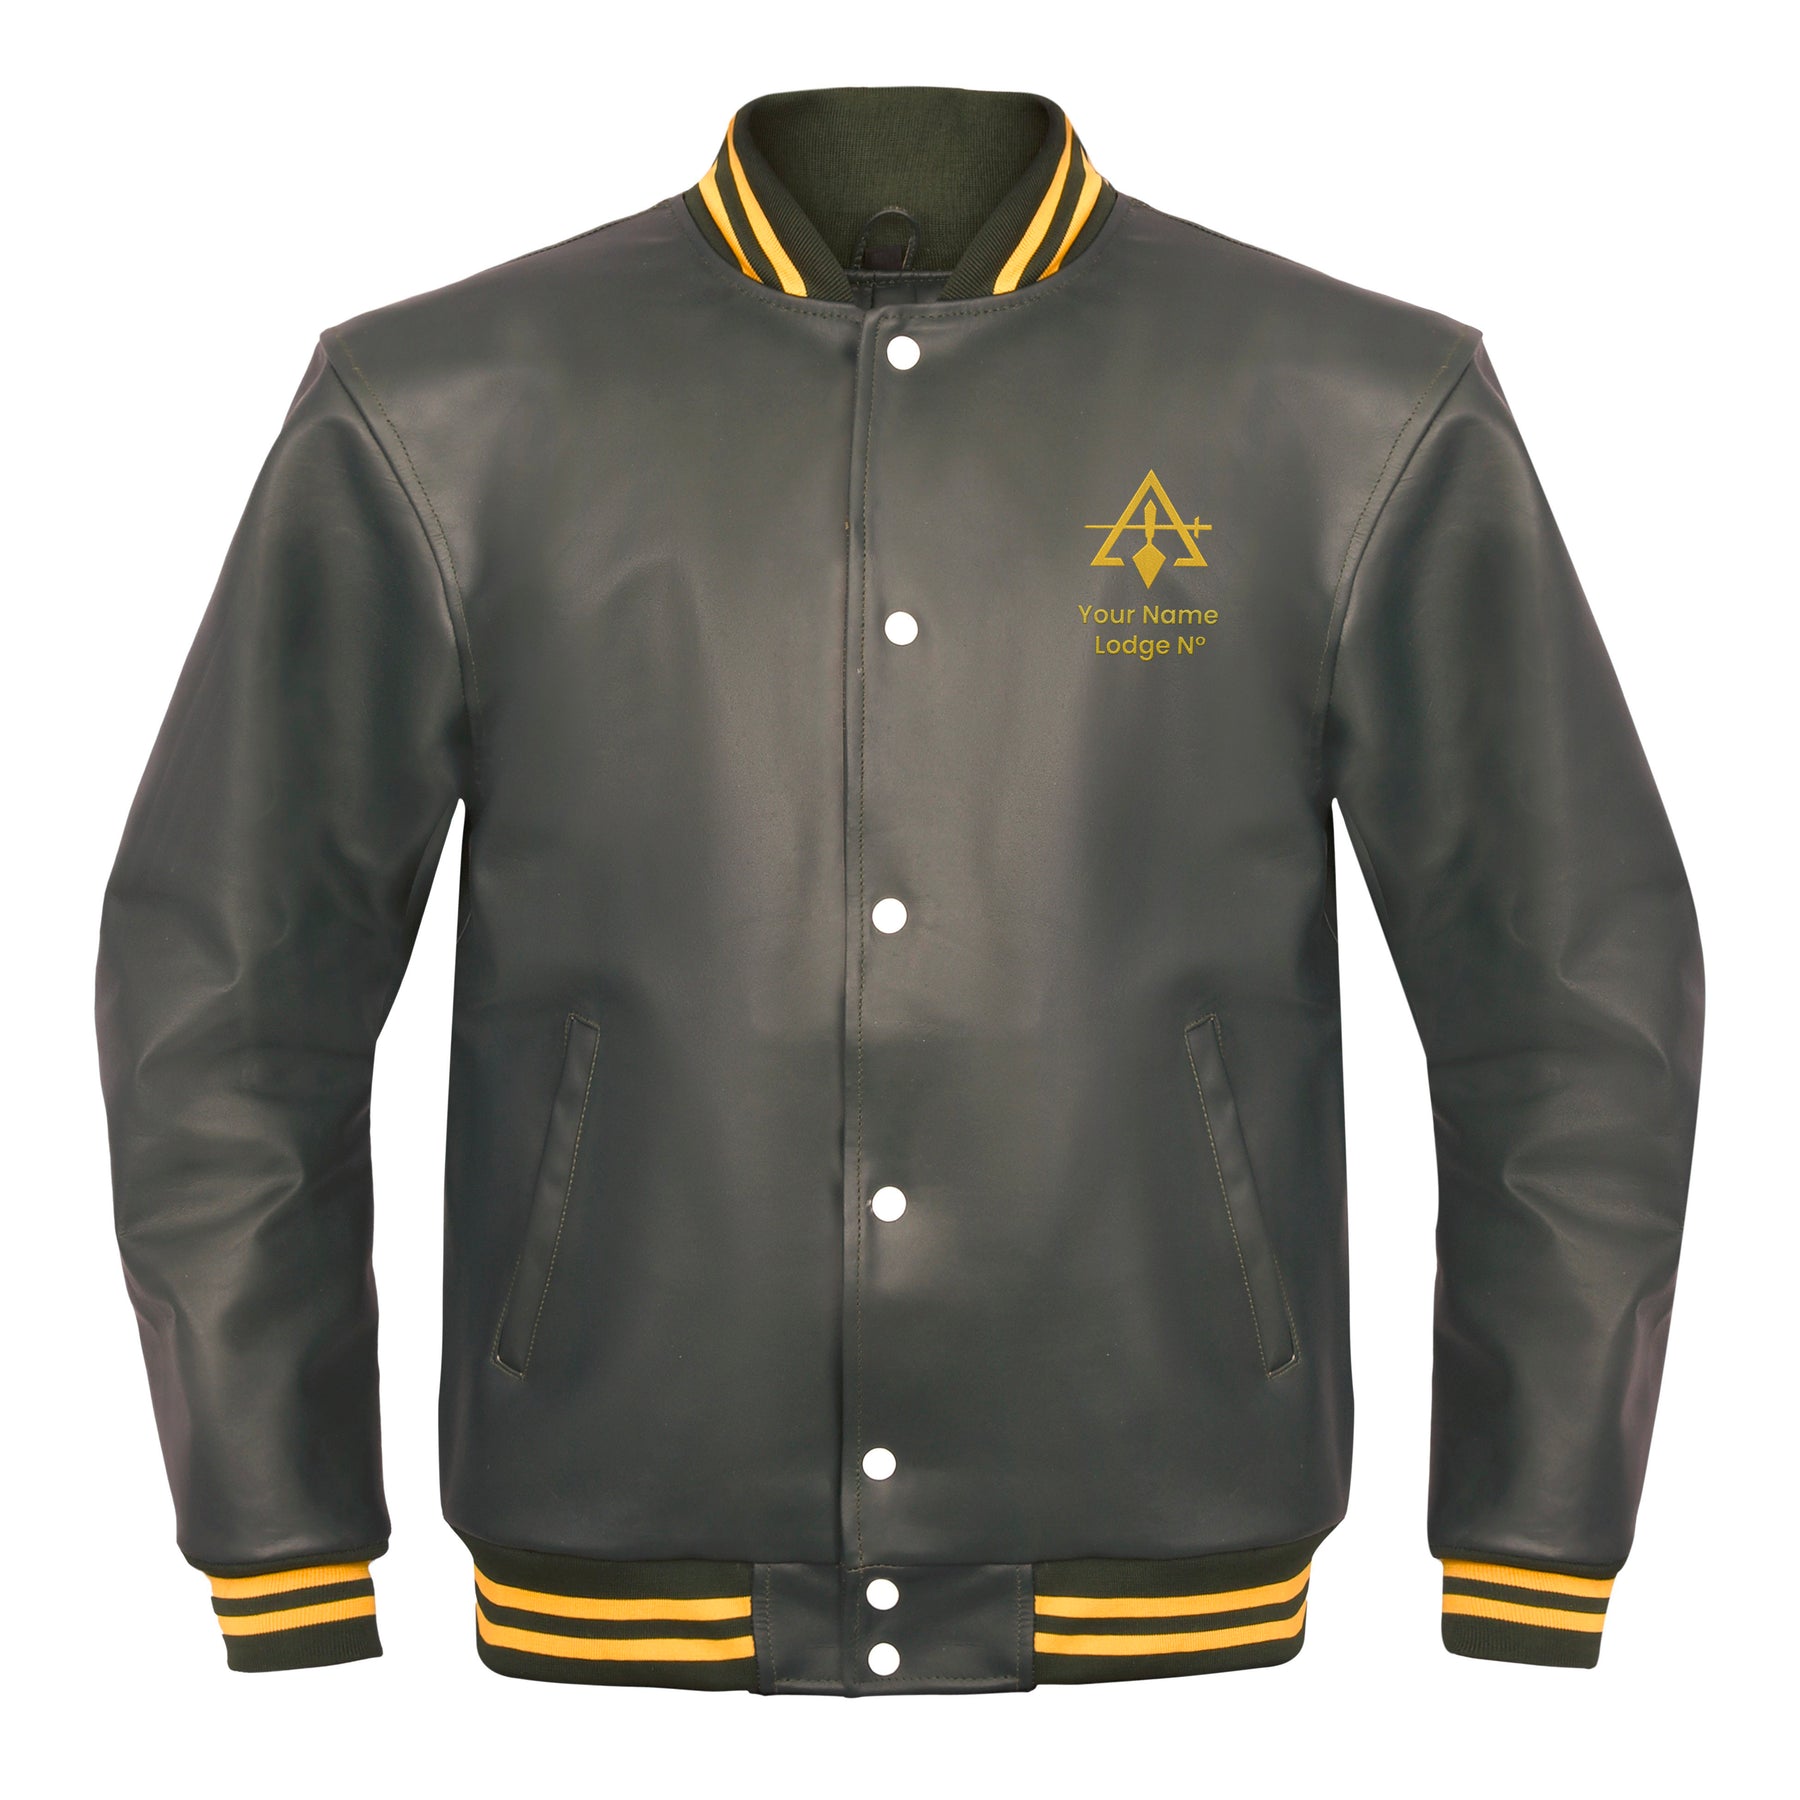 Council Jacket - Leather With Customizable Gold Embroidery - Bricks Masons